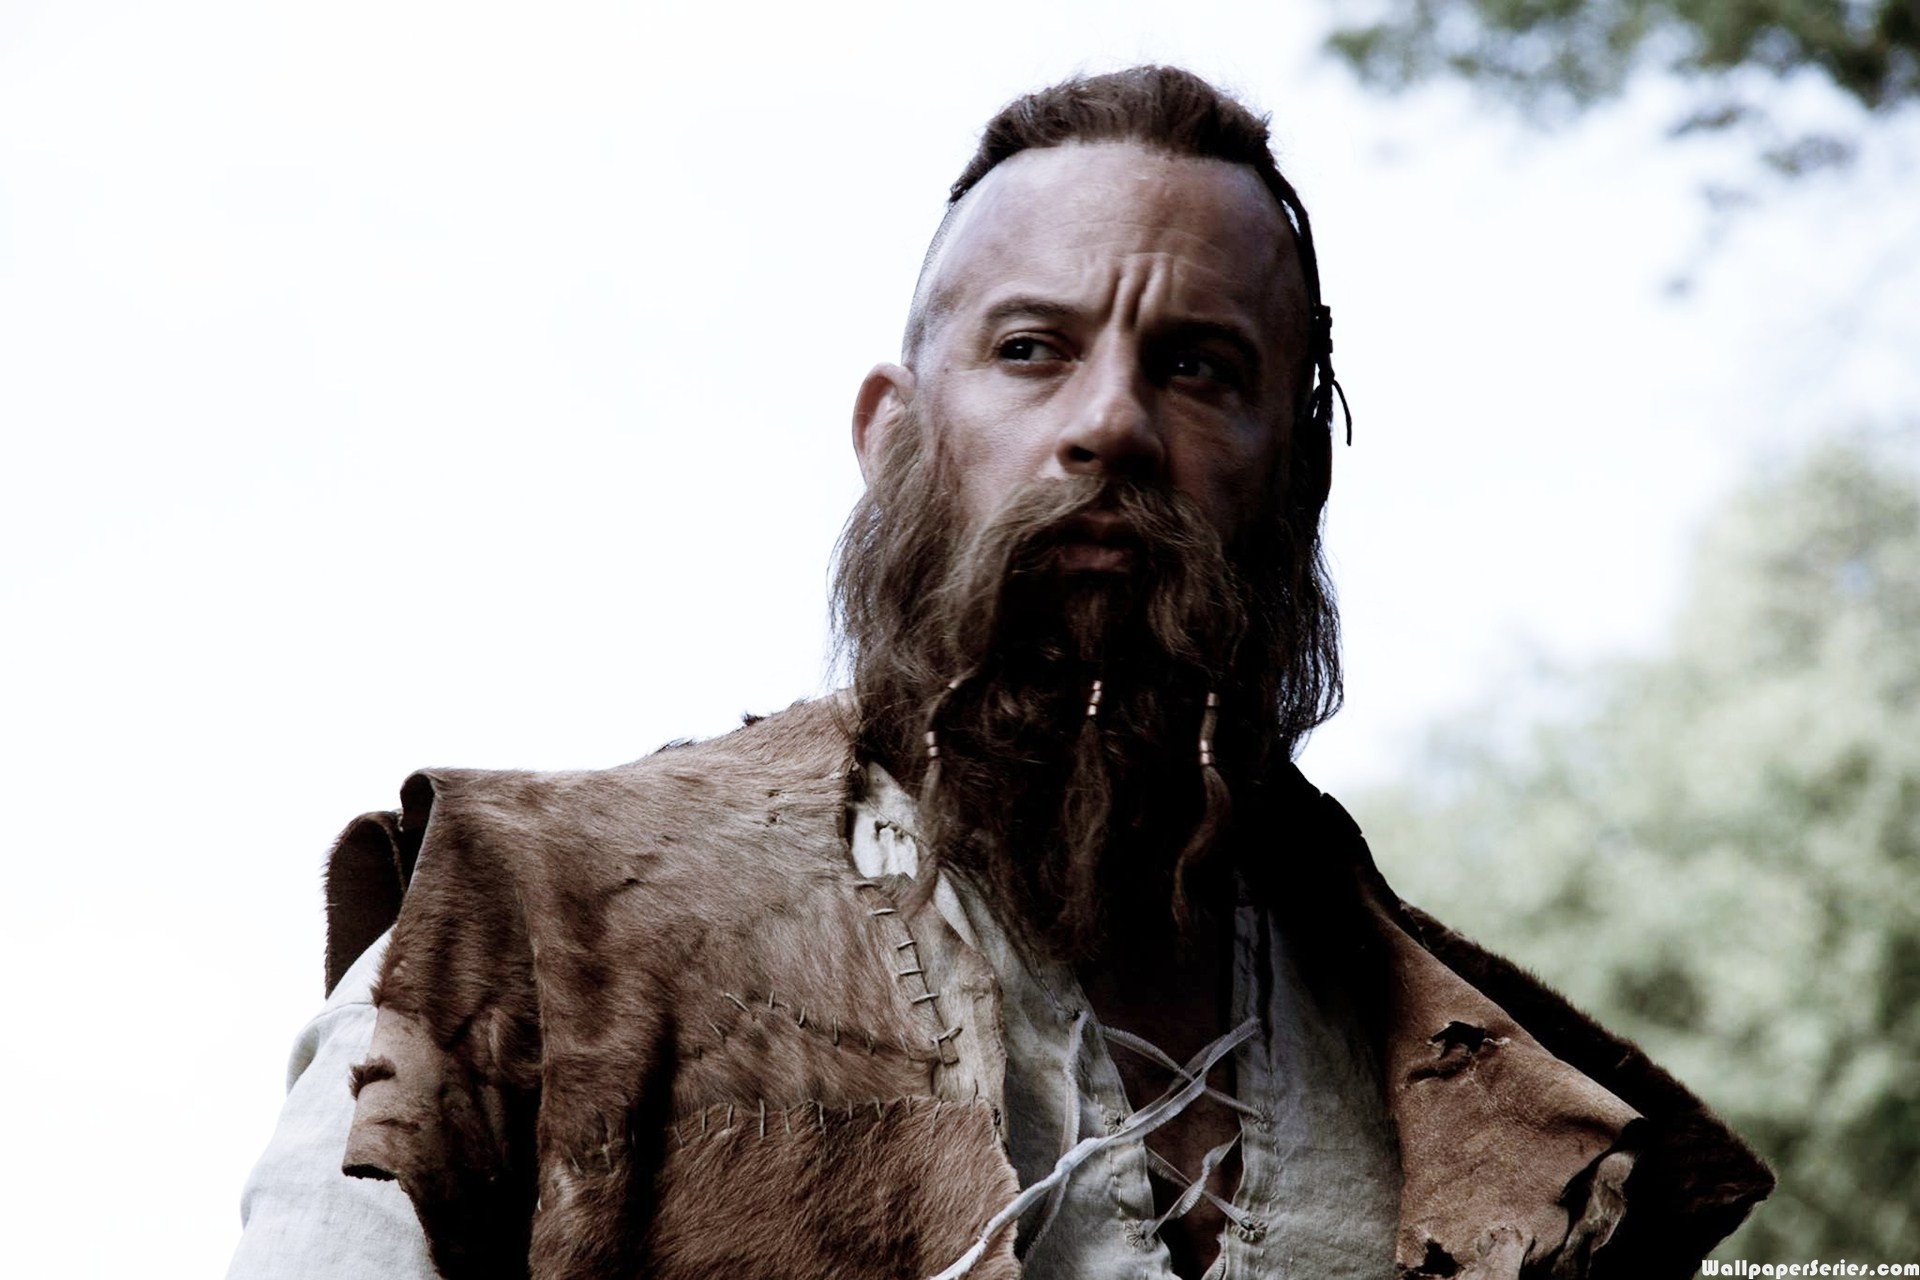 #CinemaSTop: The Last Witch Hunter, le streghe sono assatanate! - The Last Witch Hunter Vin Diesel - Gay.it